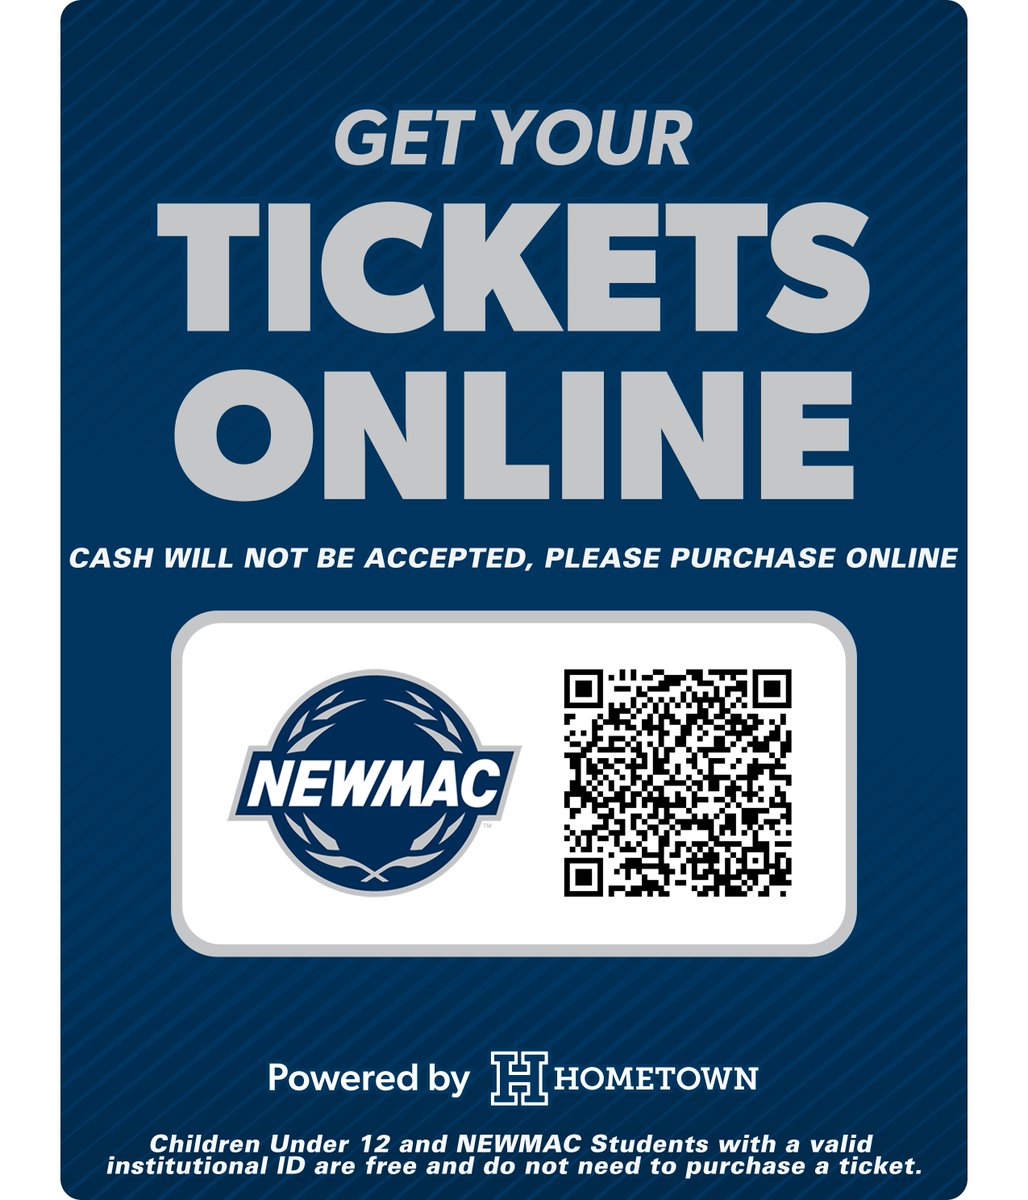 Save time at the gate and purchase your tickets ahead of time for NEWMAC Men's and Women's Lacrosse Championship action this week! Purchase here ➡️ ow.ly/48YY50Ru0WC #GoNEWMAC // #WhyD3